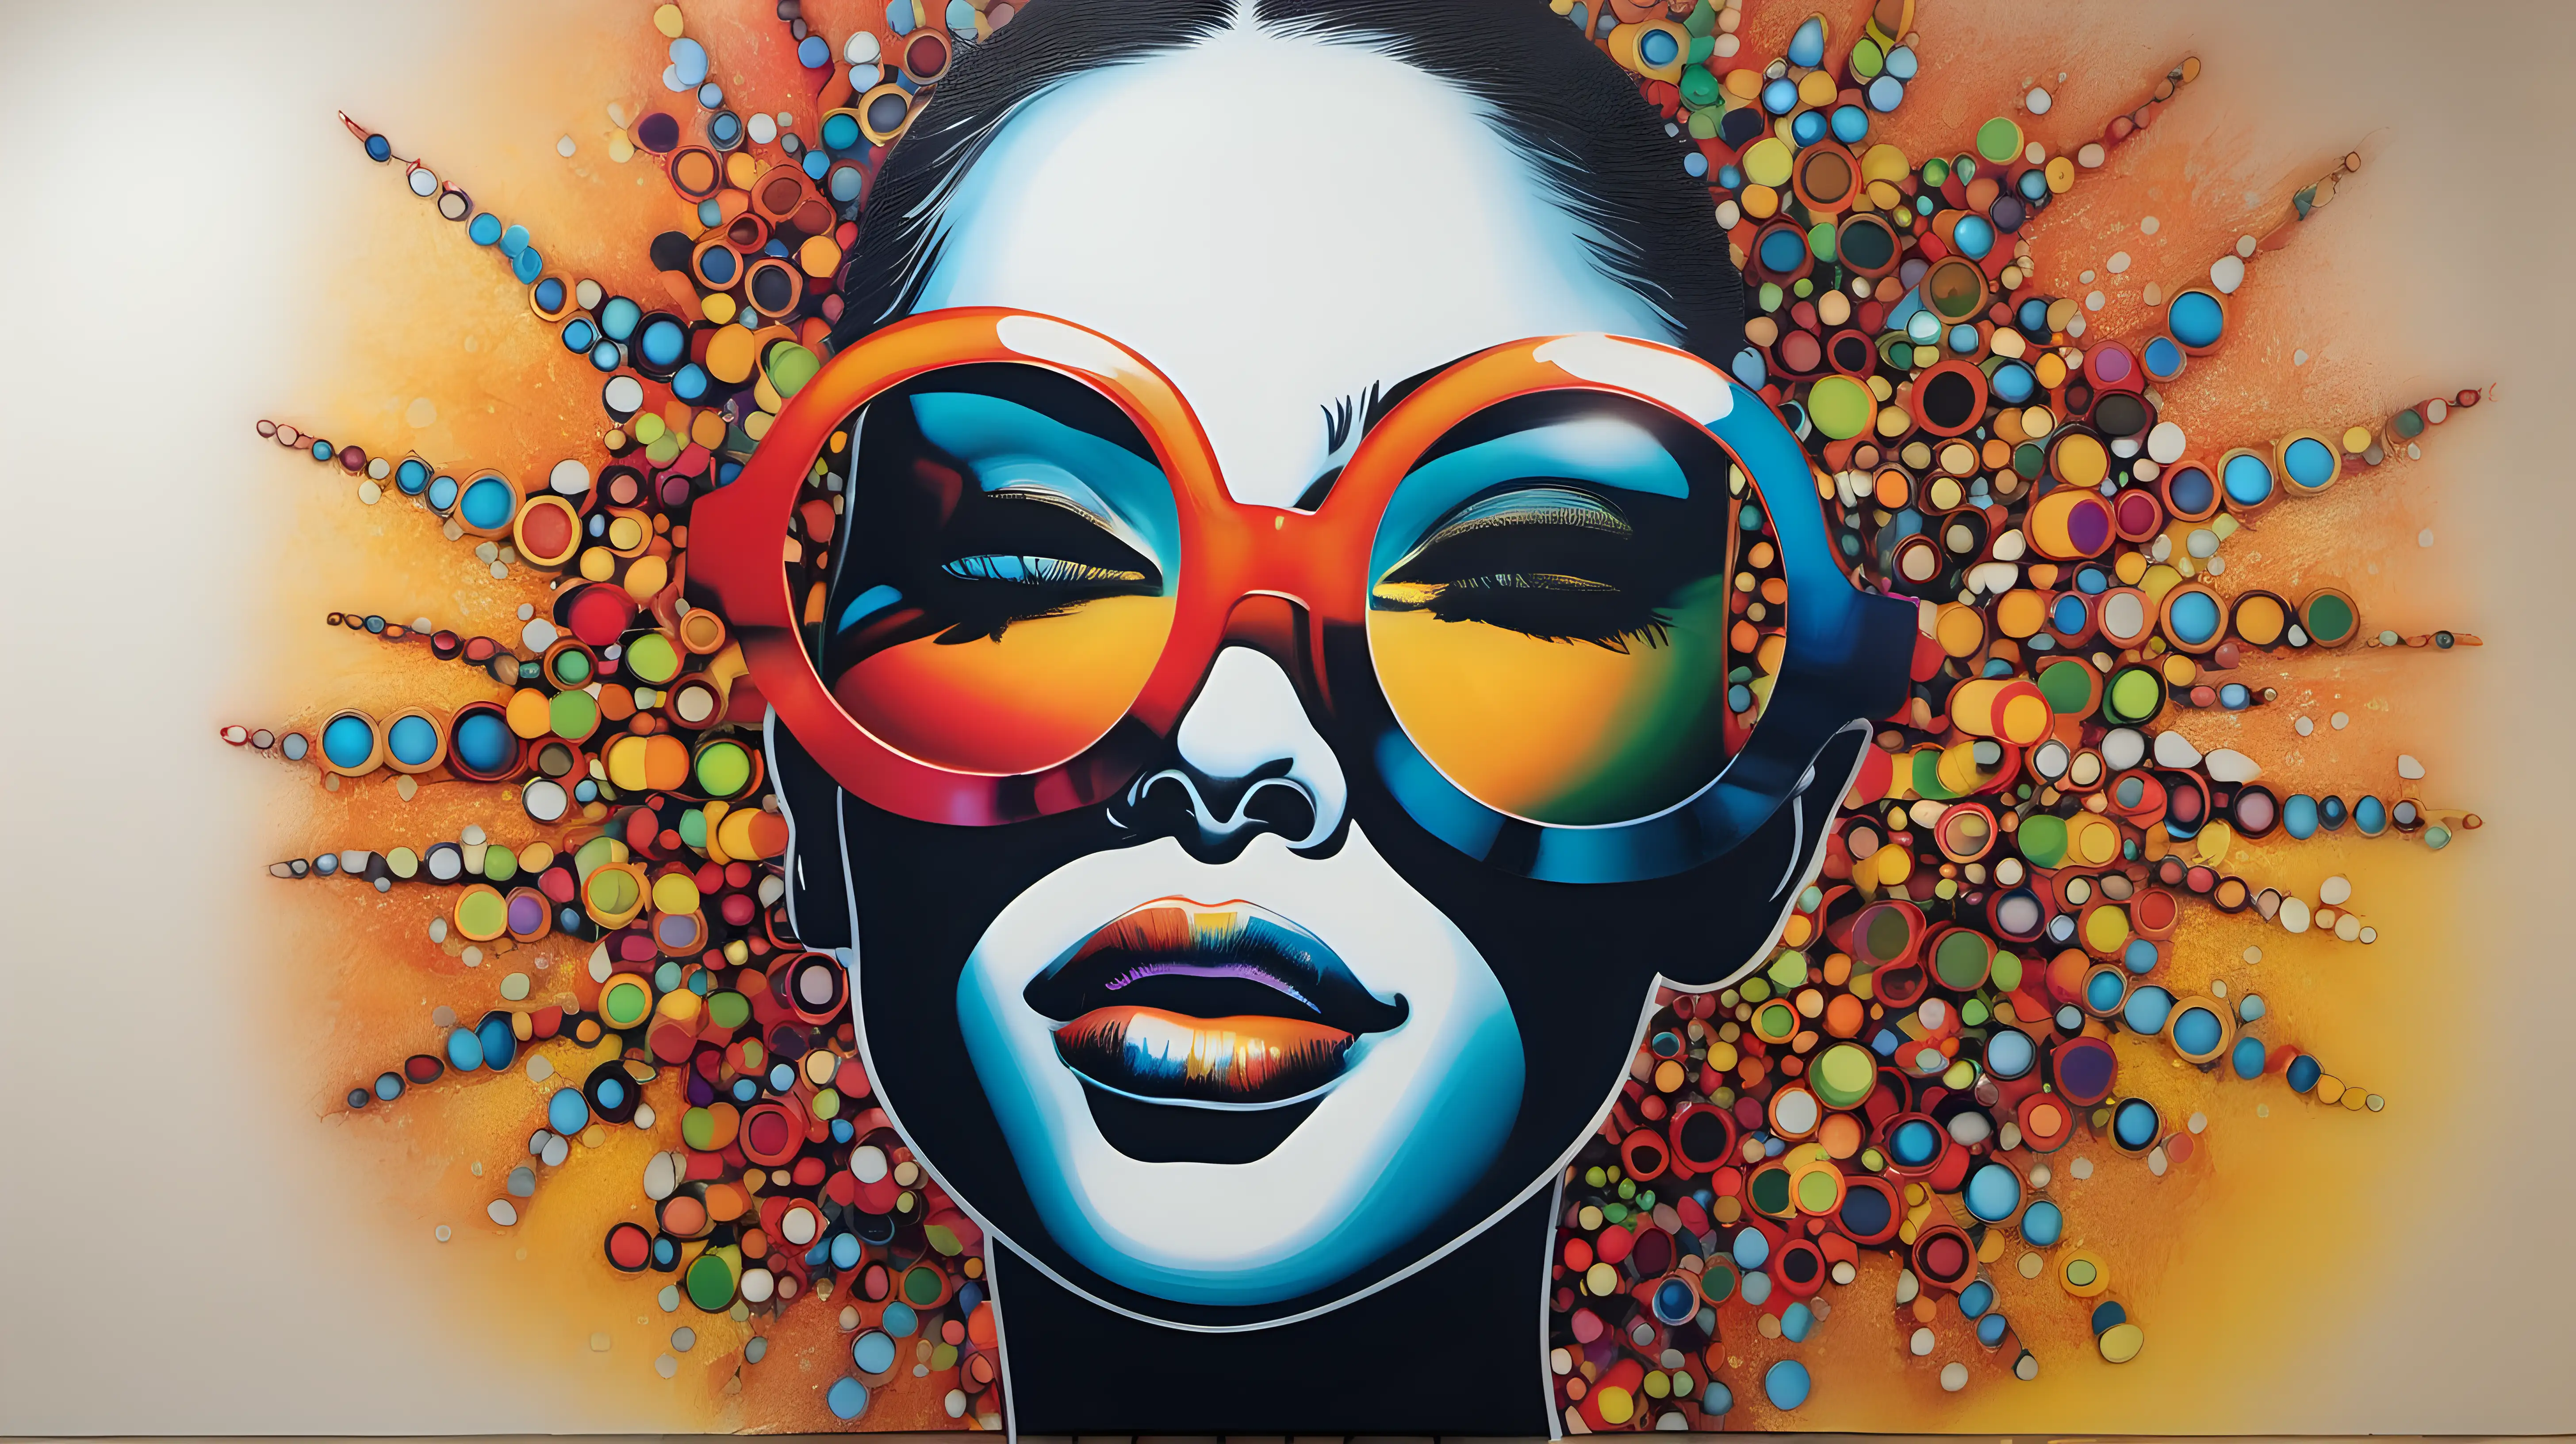     Showcase vivid energy emanating from a face adorned with vibrant glasses against a clean canvas-like background, emphasizing the power of positivity.